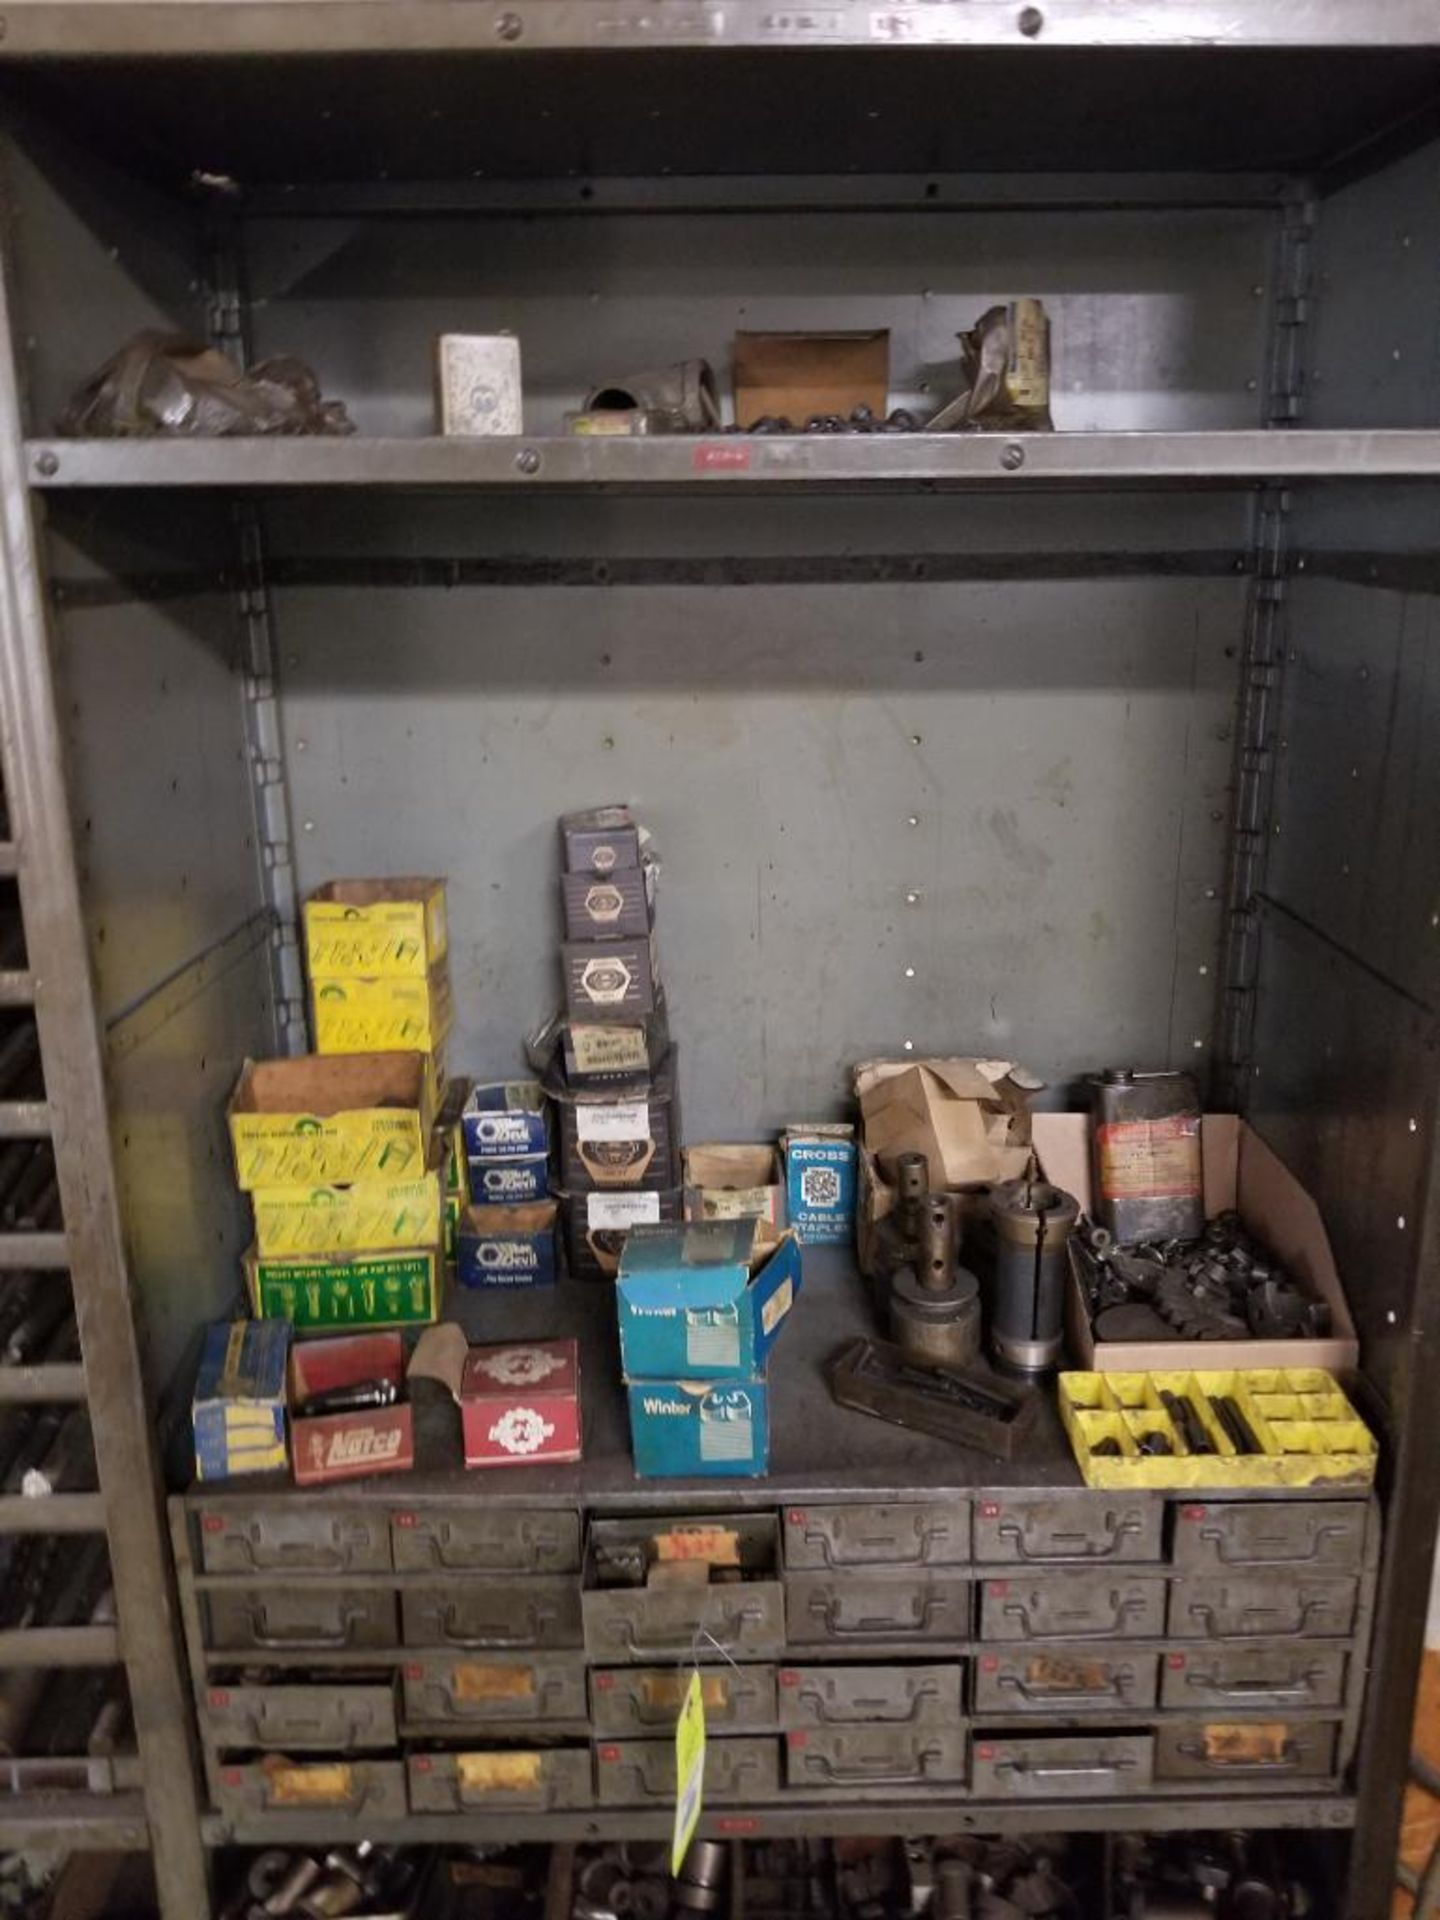 Drill index shelf with all drills and contents. This lot is for one vertical section pictured.